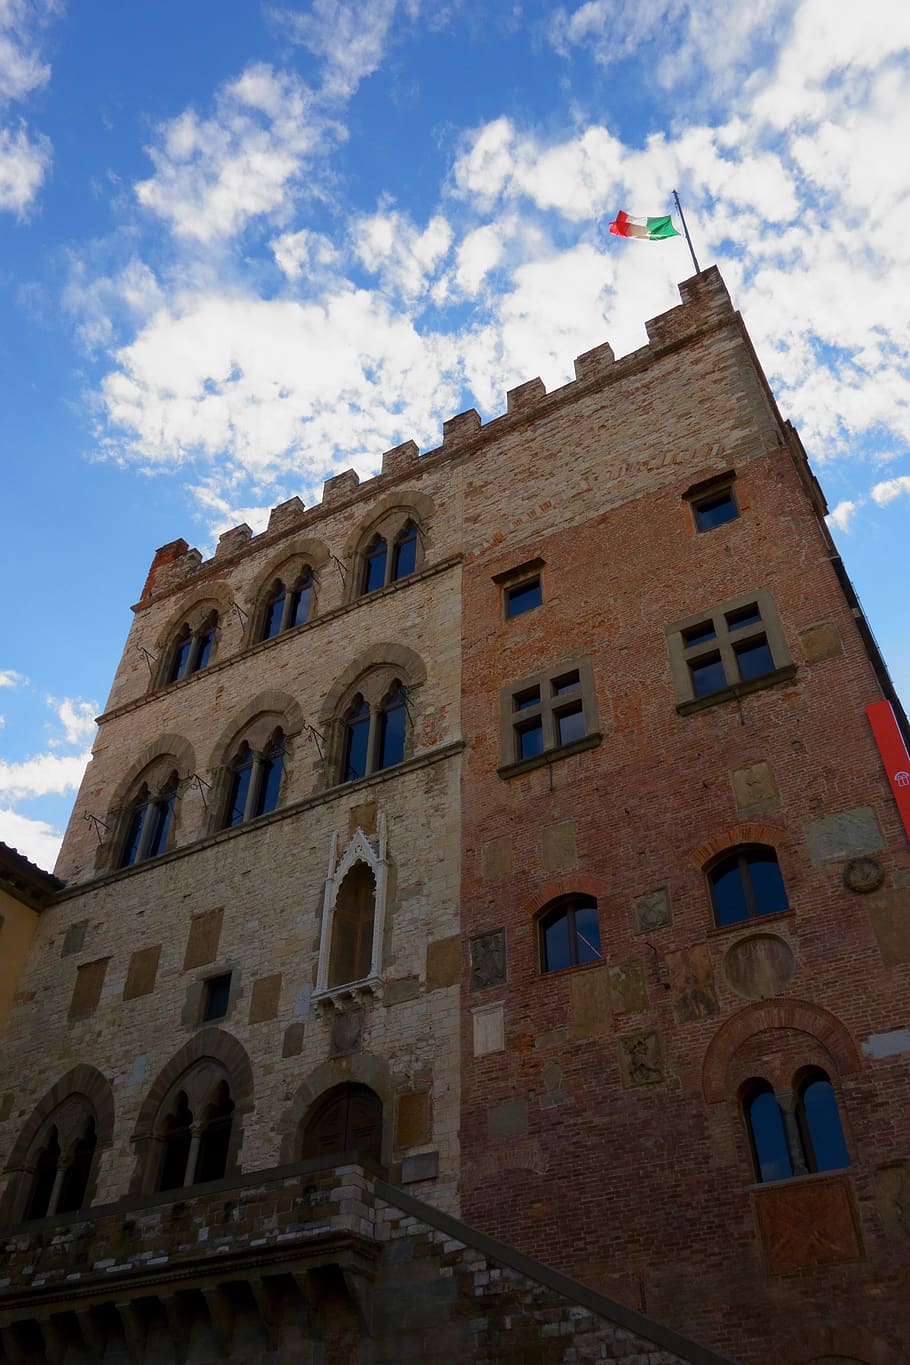 palazzo, prato, italy, architecture, construction, sky, old, monument, clouds, historian